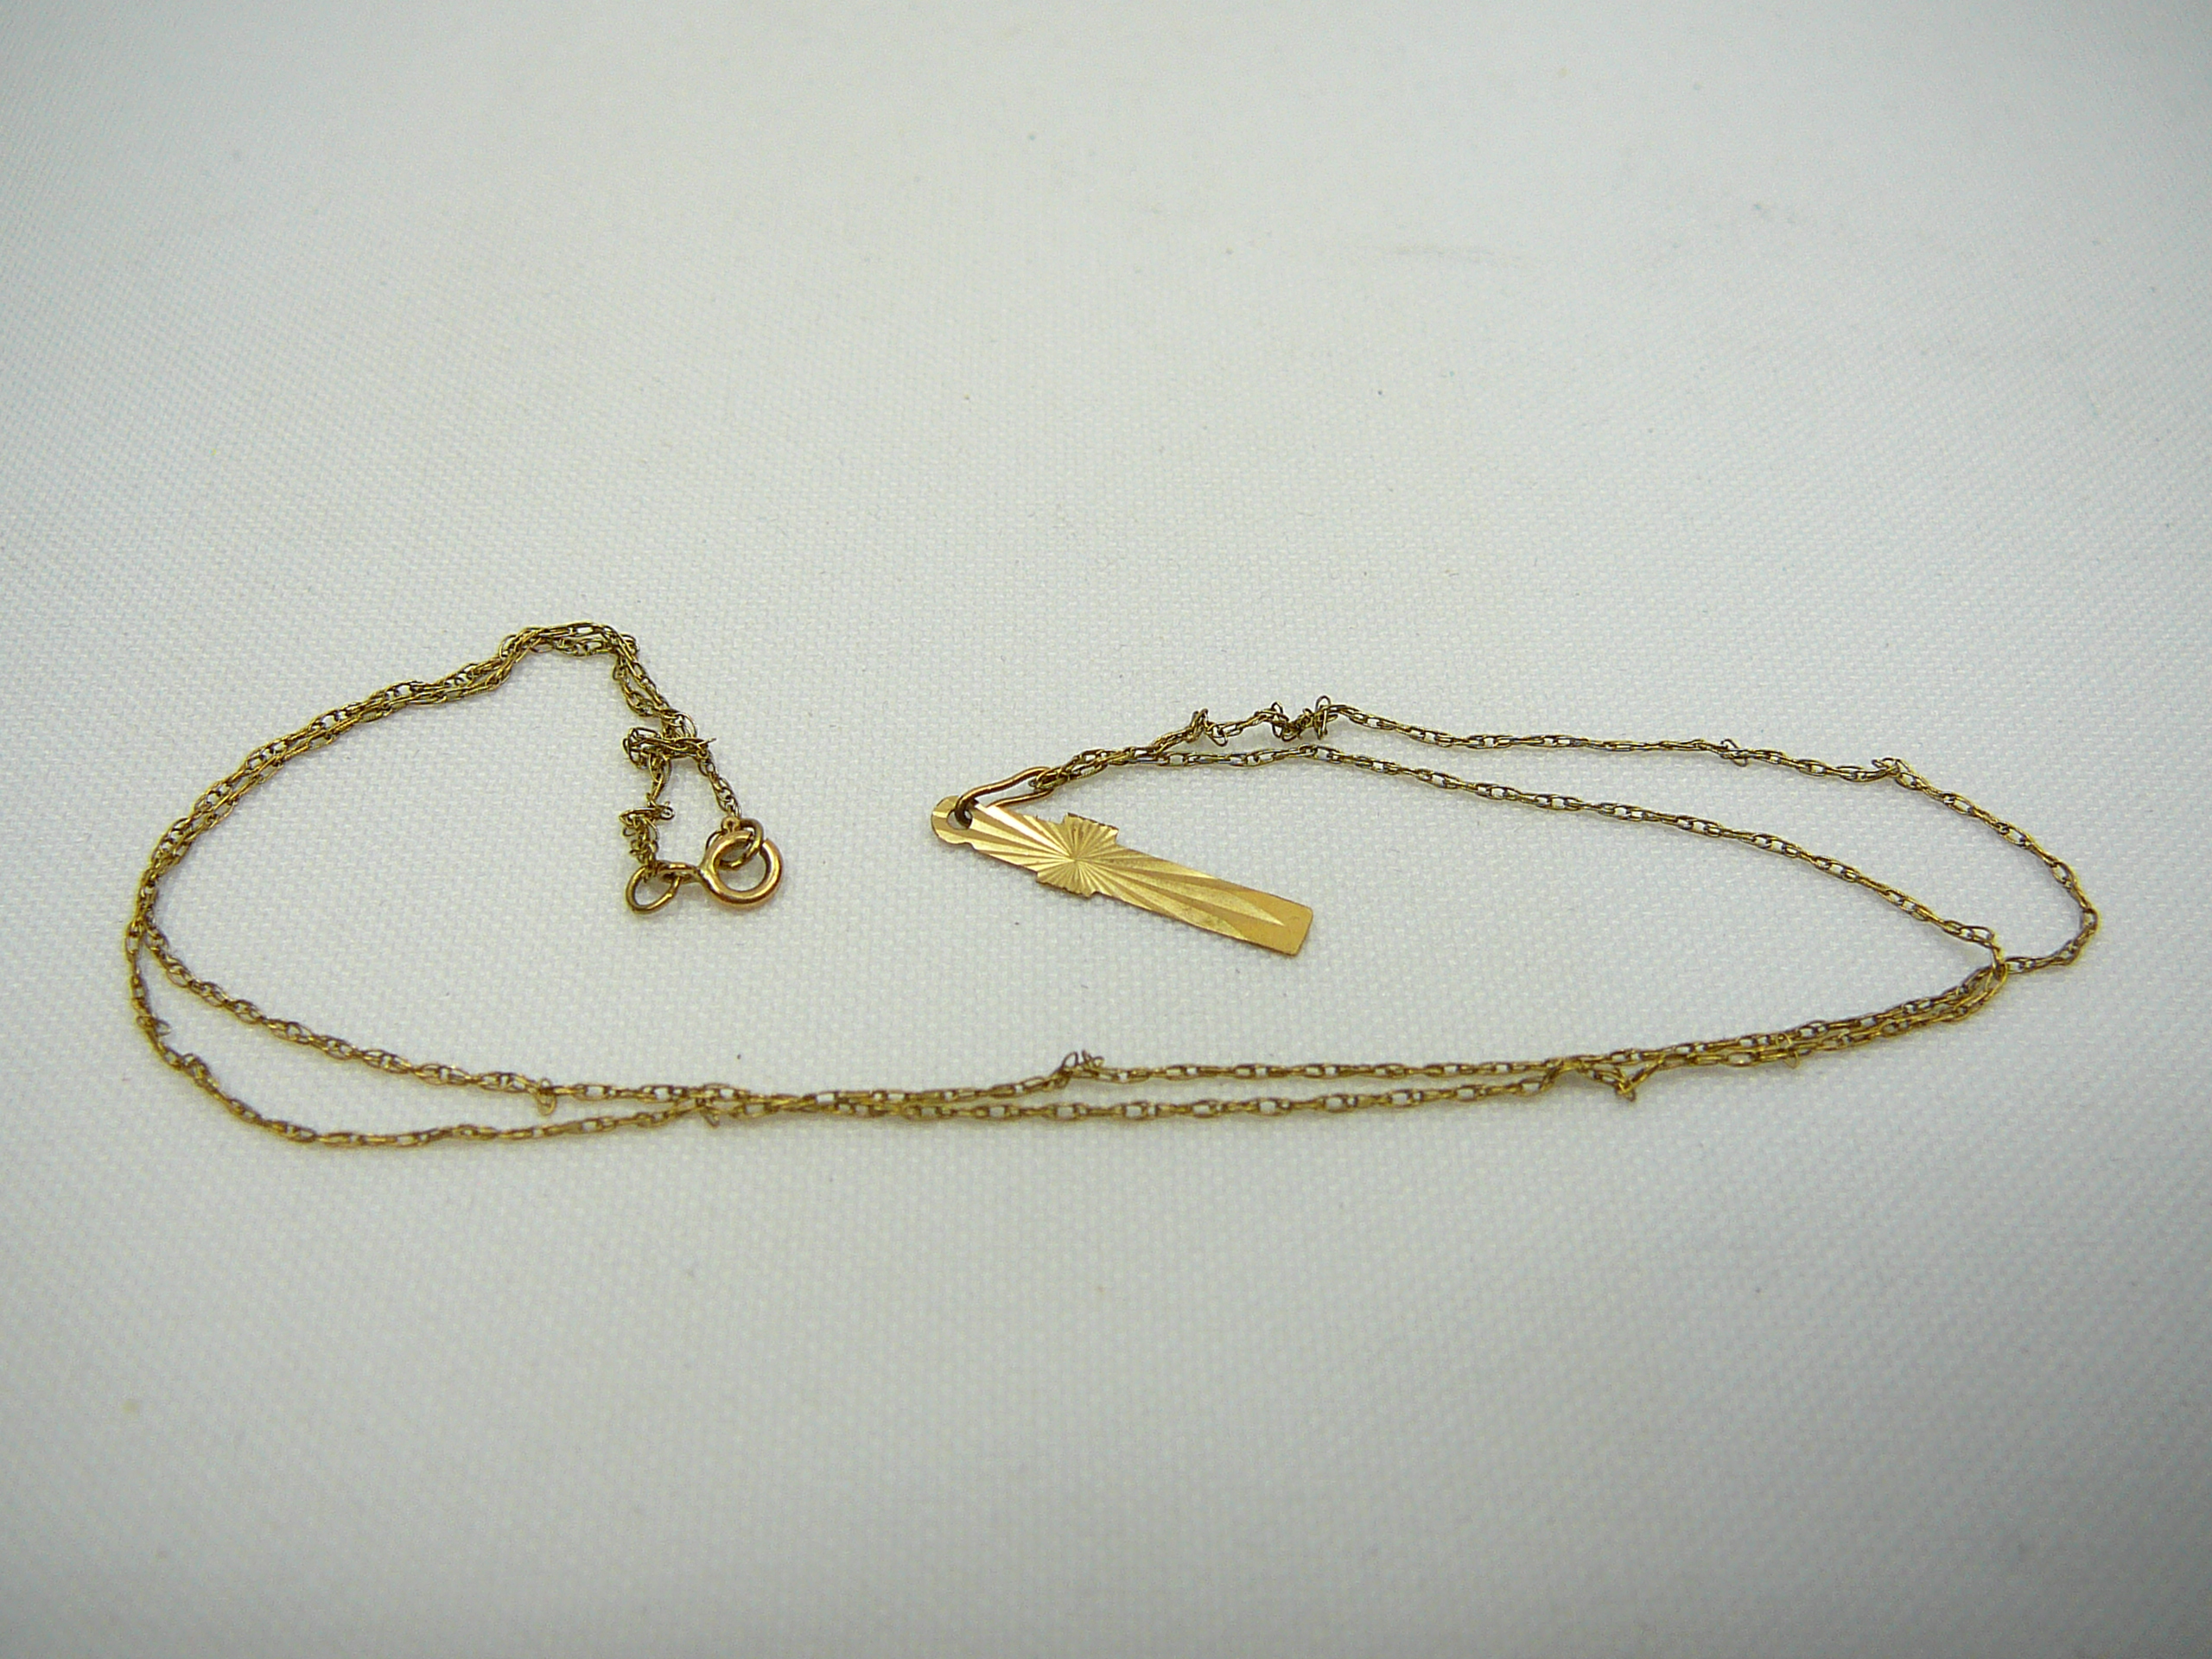 Gold Trace Chain and Damaged Gold Crucifix